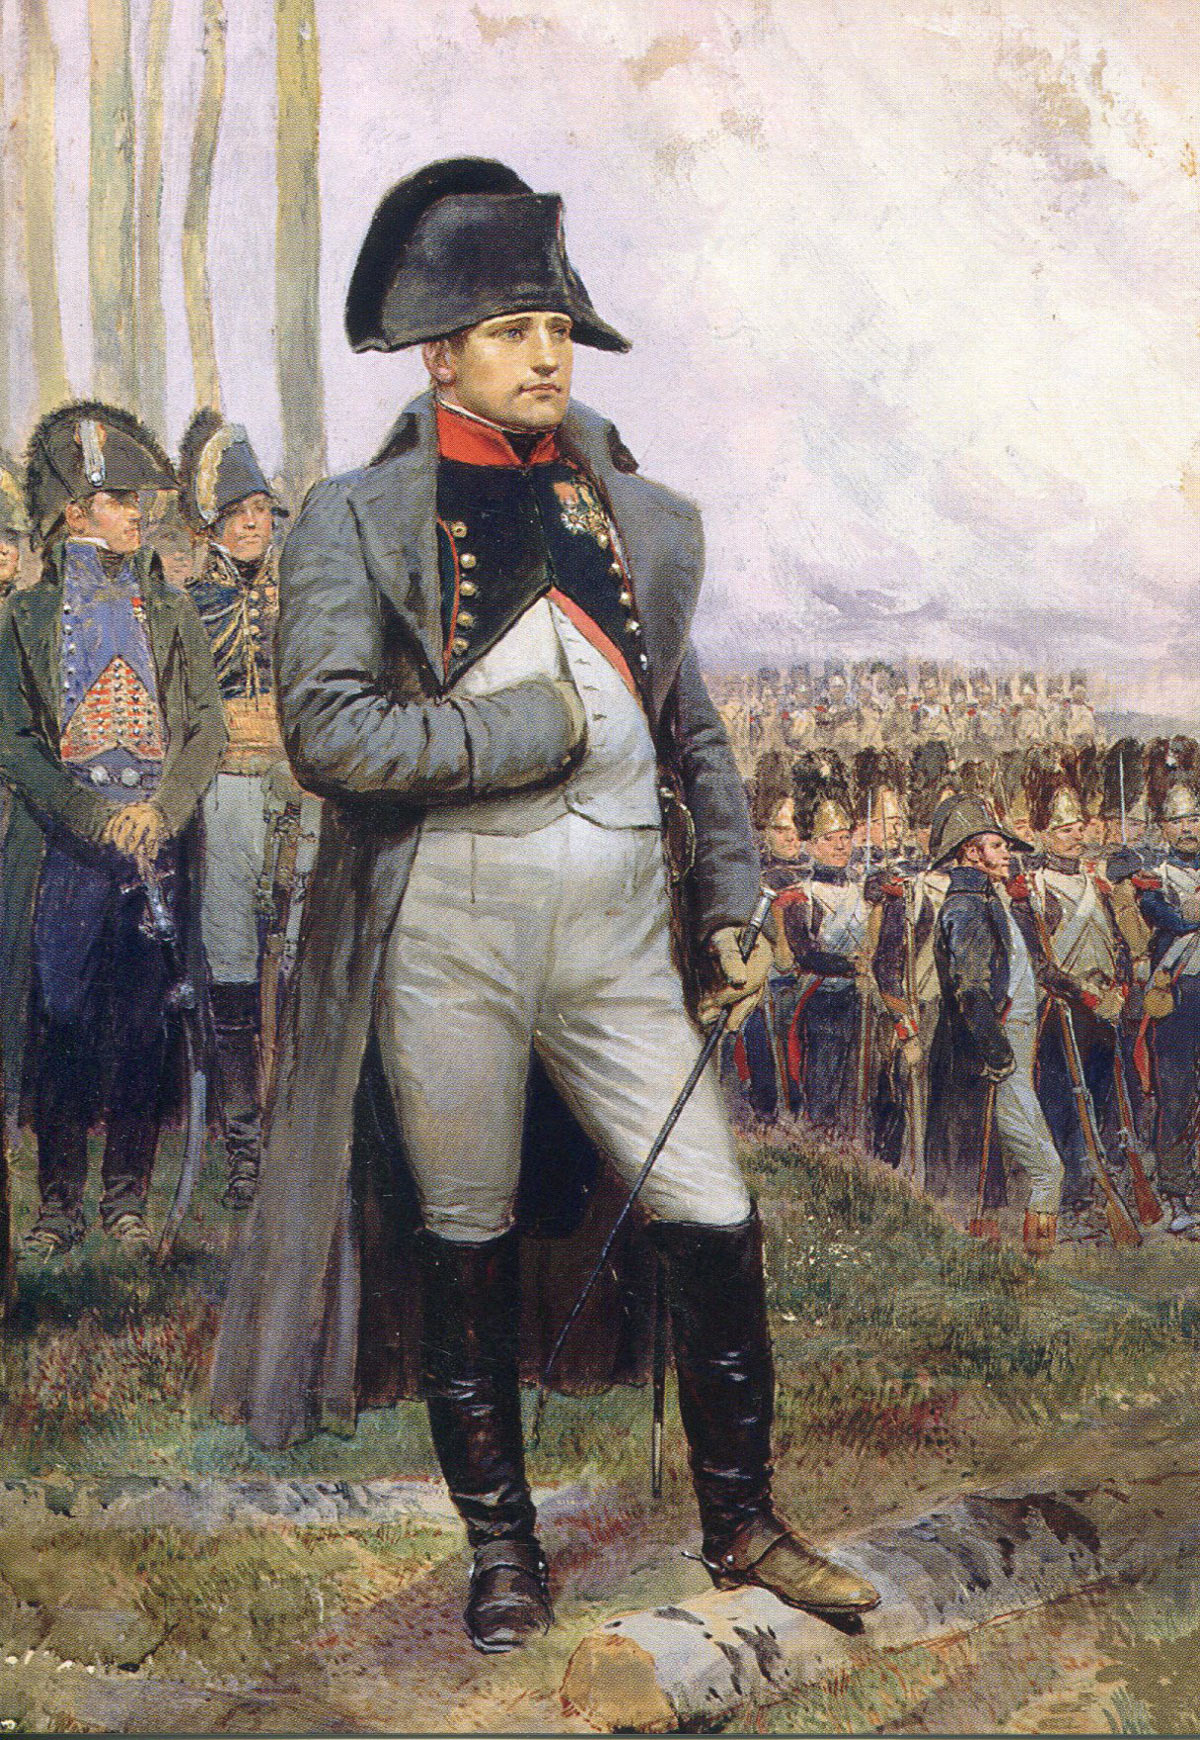 Emperor-Napoleon-reviewing-his-Guard-by-Edouard-Detaille.jpg